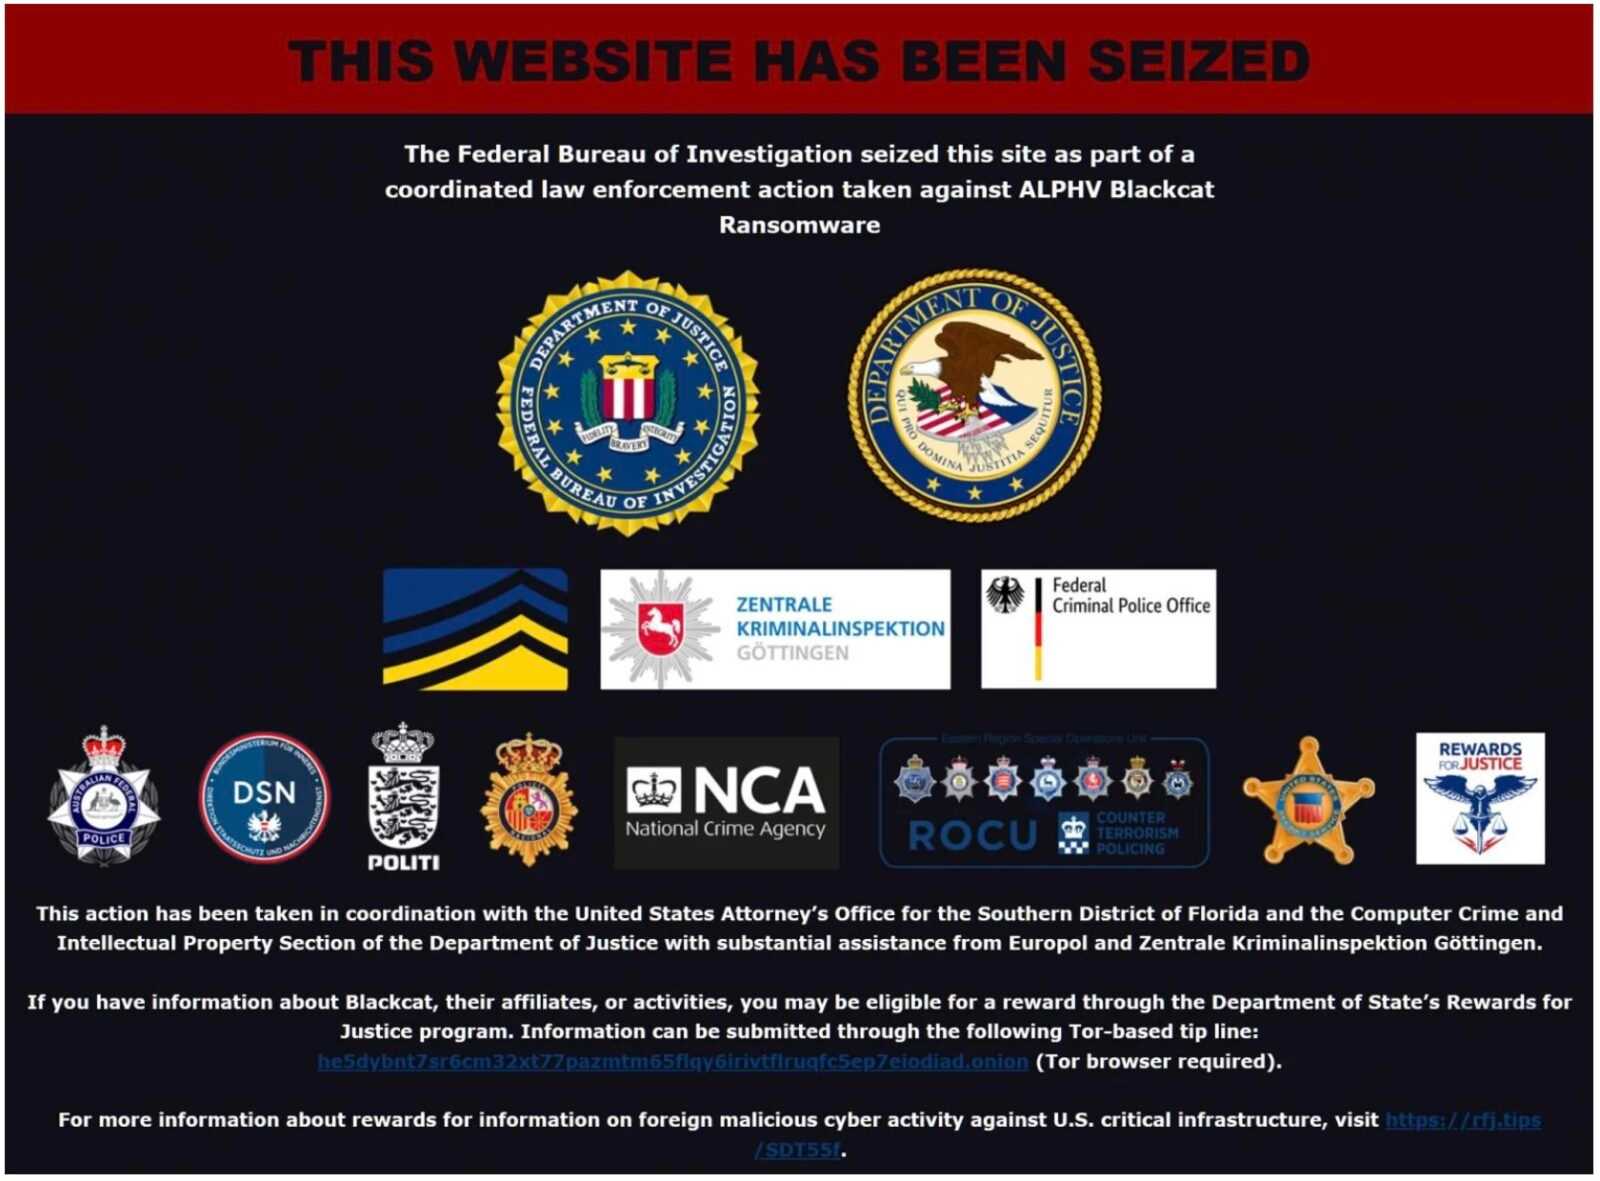 Screenshot stating the FBI has seized the ALPHV Blackcat site as part of a coordinated law enforcement action.